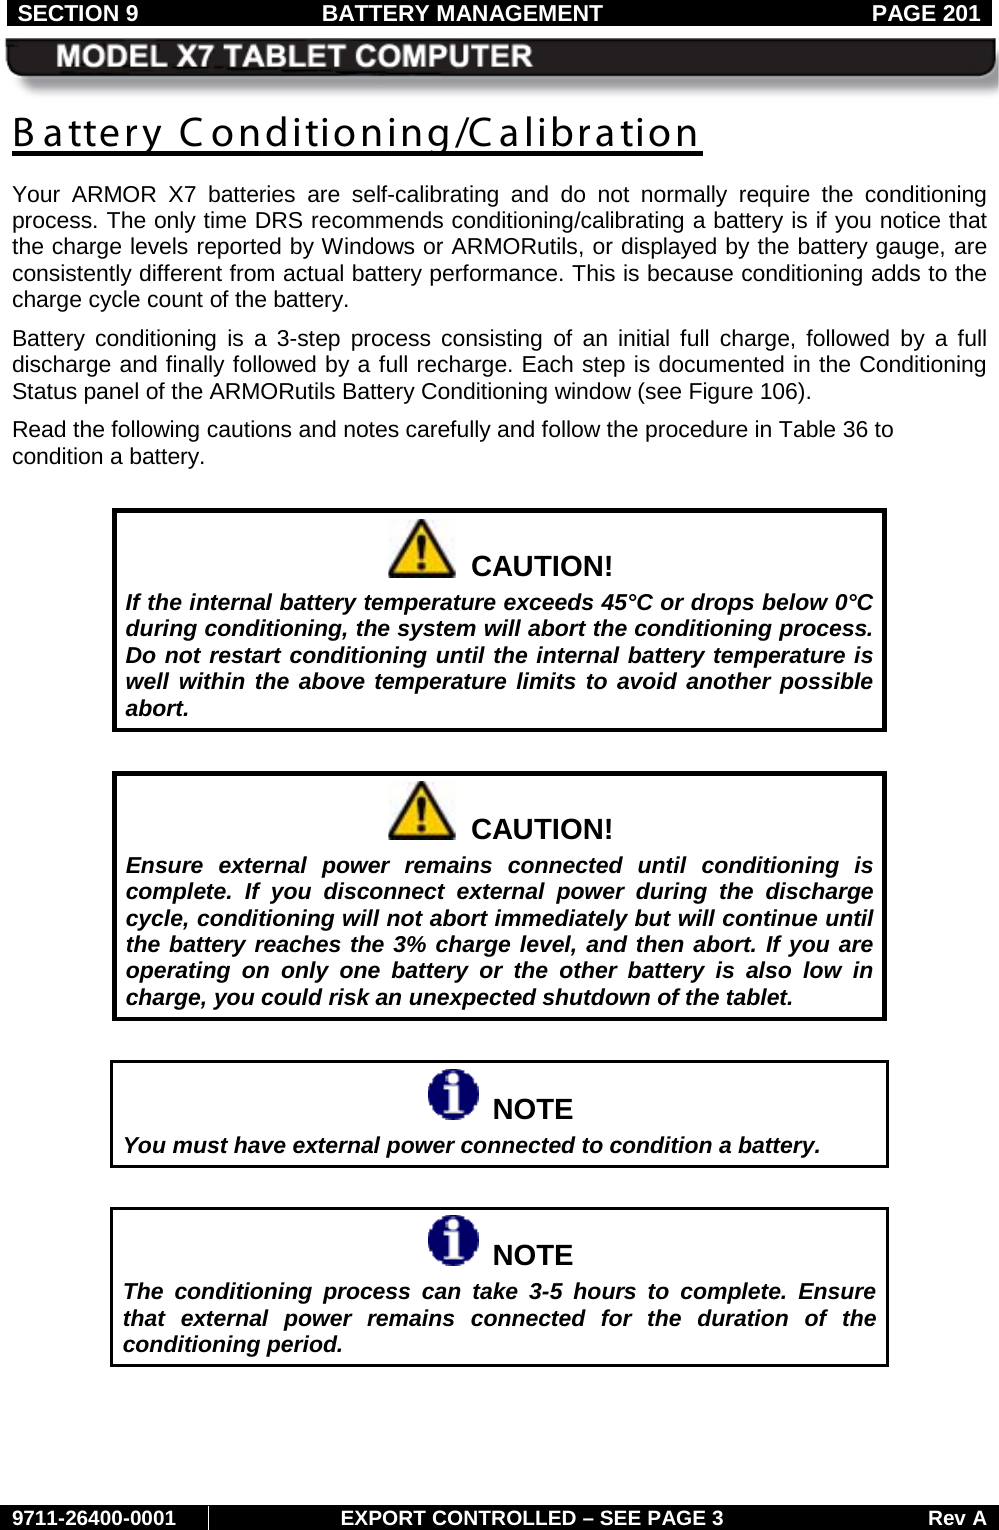 SECTION 9 BATTERY MANAGEMENT  PAGE 201     9711-26400-0001 EXPORT CONTROLLED – SEE PAGE 3 Rev A B attery C onditioning/Calibration Your ARMOR X7 batteries are self-calibrating and do not normally  require the conditioning process. The only time DRS recommends conditioning/calibrating a battery is if you notice that the charge levels reported by Windows or ARMORutils, or displayed by the battery gauge, are consistently different from actual battery performance. This is because conditioning adds to the charge cycle count of the battery. Battery conditioning is a 3-step process consisting of an initial full charge, followed by a full discharge and finally followed by a full recharge. Each step is documented in the Conditioning Status panel of the ARMORutils Battery Conditioning window (see Figure 106).  Read the following cautions and notes carefully and follow the procedure in Table 36 to condition a battery.    CAUTION! If the internal battery temperature exceeds 45°C or drops below 0°C during conditioning, the system will abort the conditioning process. Do not restart conditioning until the internal battery temperature is well within the above temperature limits to avoid another possible abort.    CAUTION! Ensure external power remains connected until conditioning is complete. If you disconnect external power during the discharge cycle, conditioning will not abort immediately but will continue until the battery reaches the 3% charge level, and then abort. If you are operating on only one battery or the other battery is also low in charge, you could risk an unexpected shutdown of the tablet.    NOTE You must have external power connected to condition a battery.     NOTE The conditioning process can take 3-5 hours to complete. Ensure that external power remains connected for the duration of the conditioning period.   